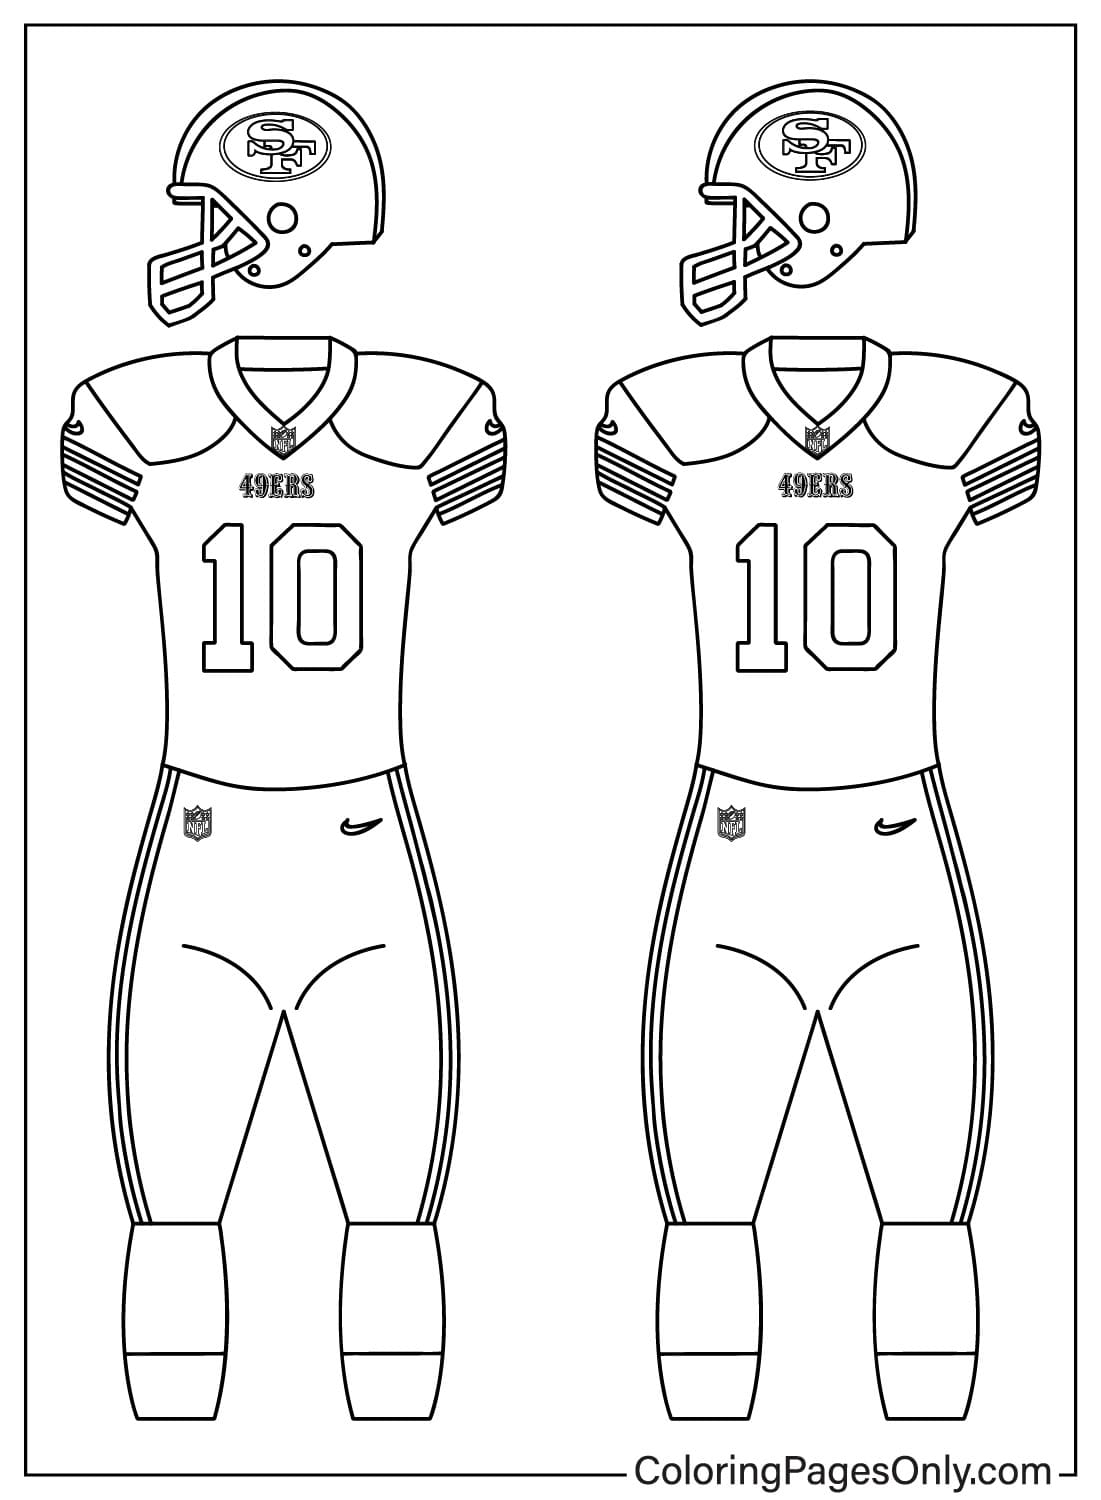 San Francisco 49ers Uniform Coloring Page from San Francisco 49ers